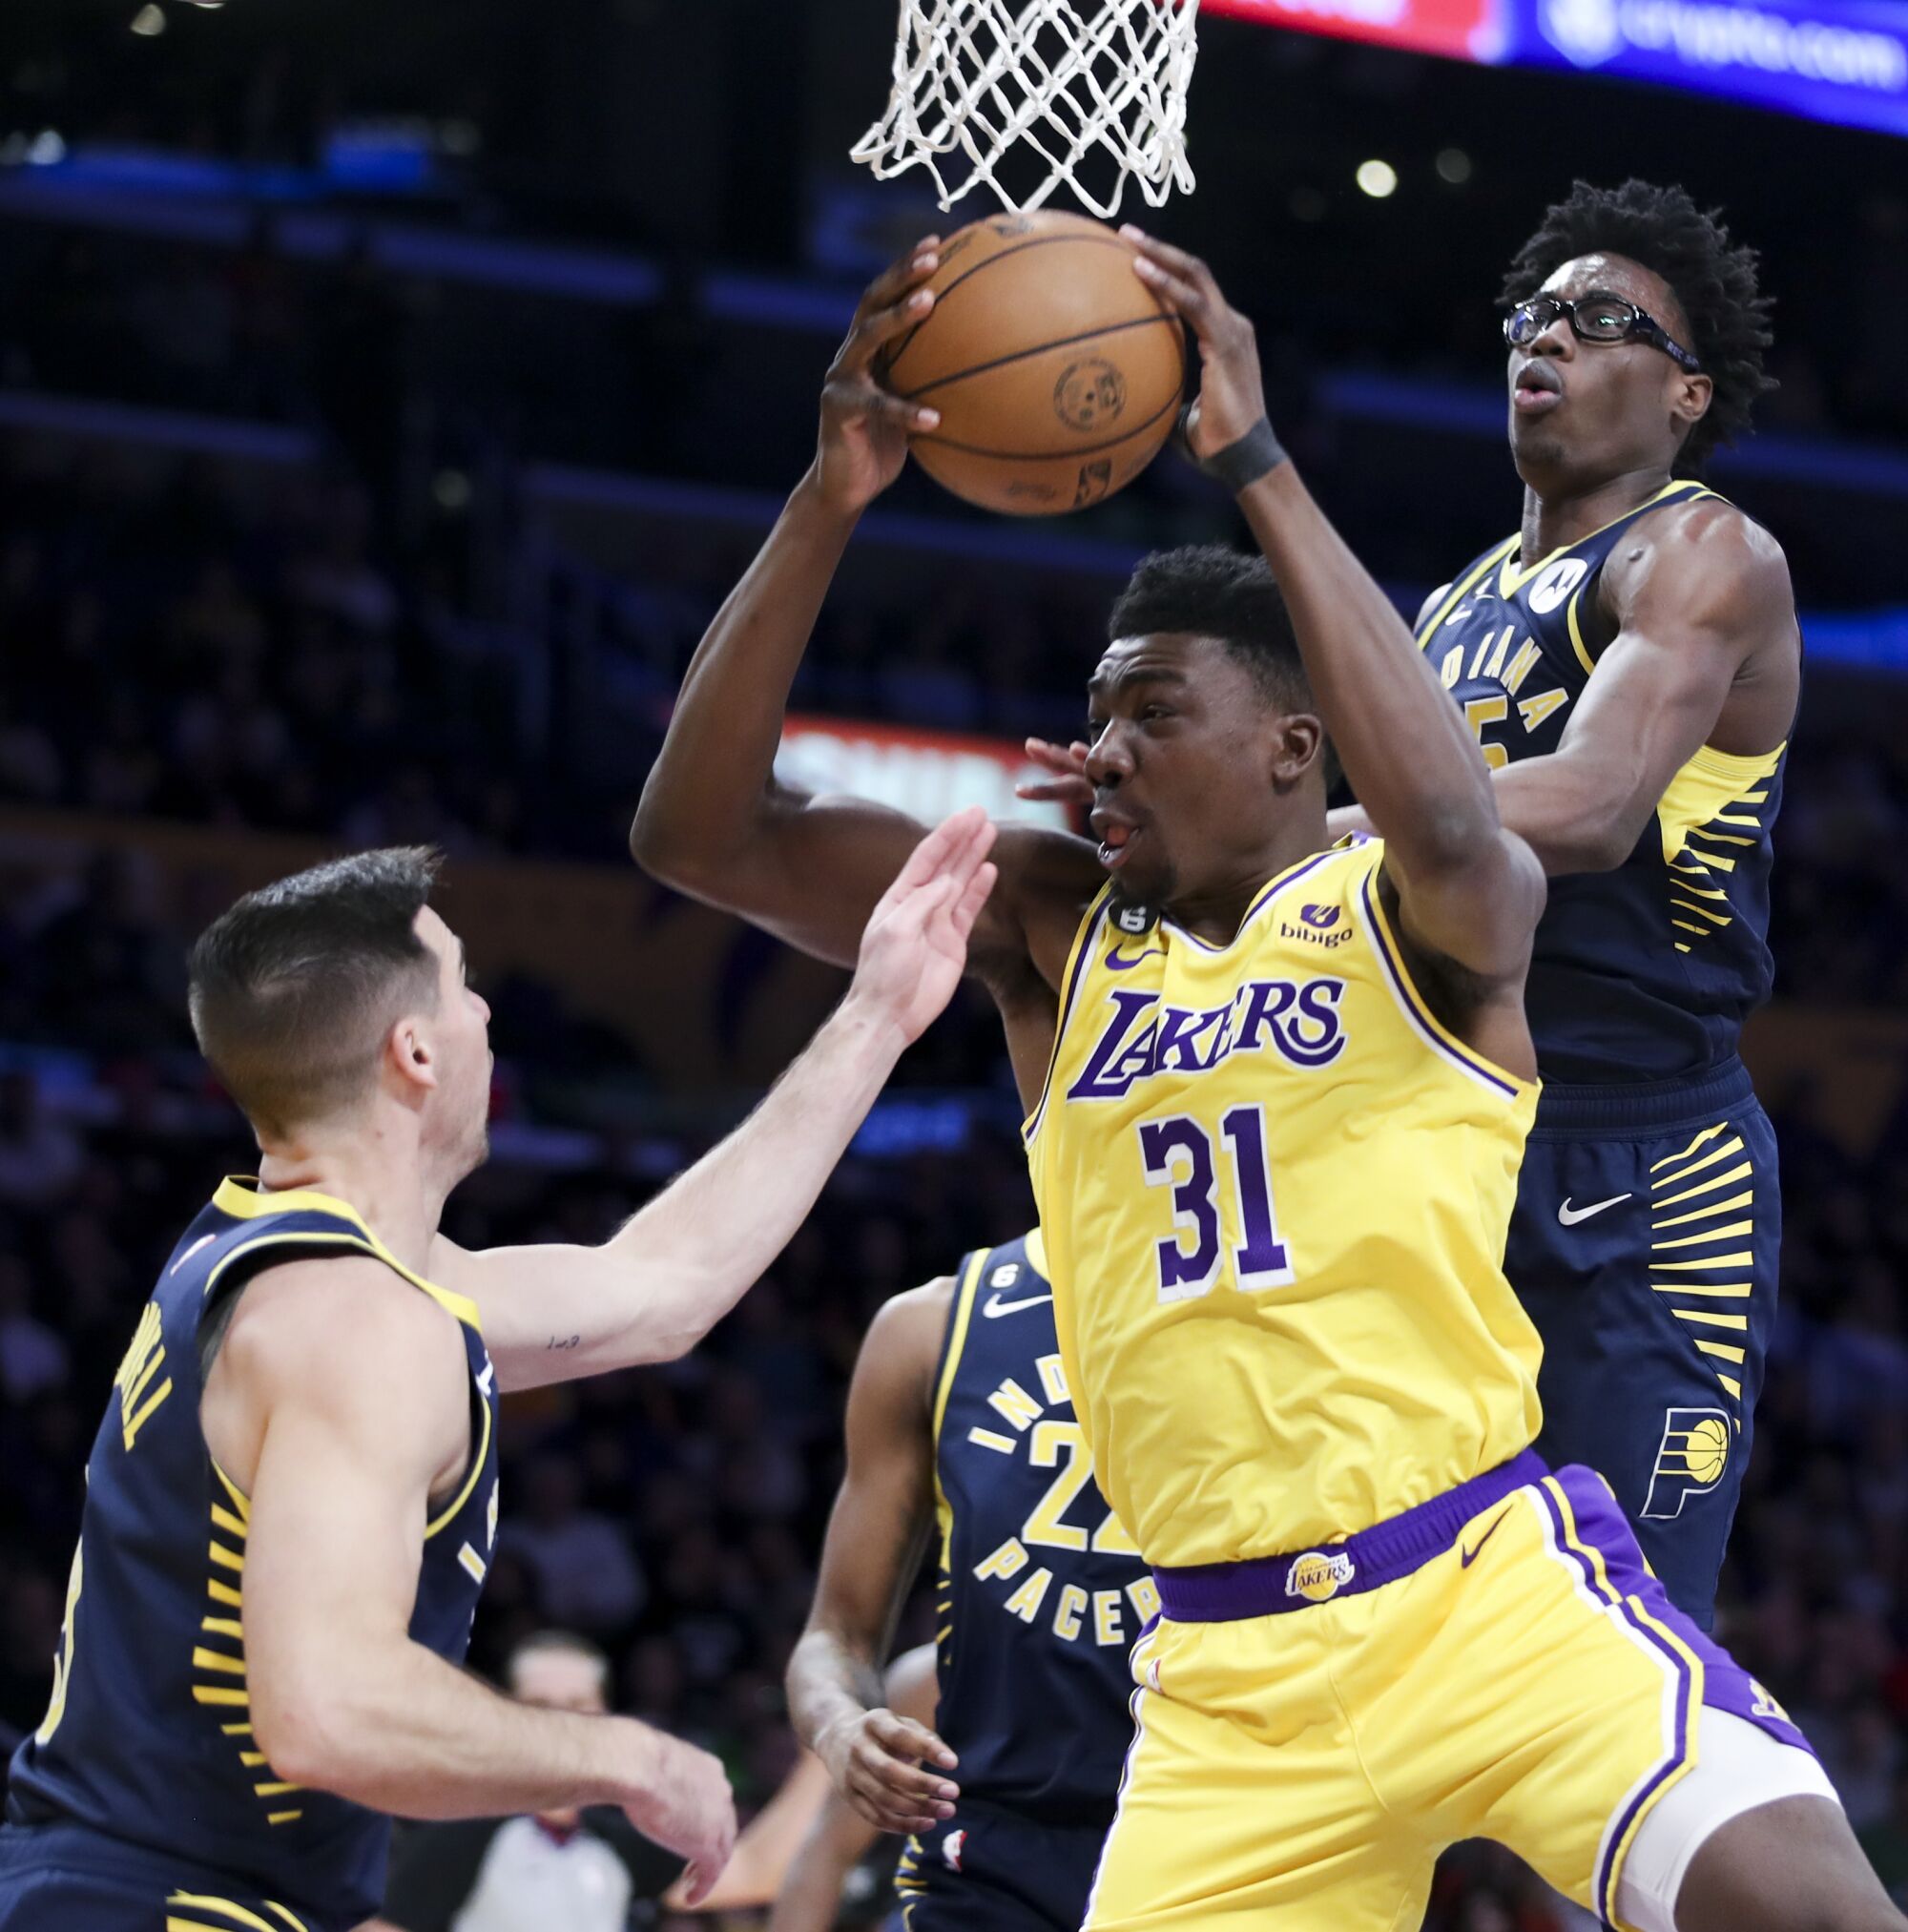 Lakers center Thomas Bryant grabs a rebound against the Pacers.